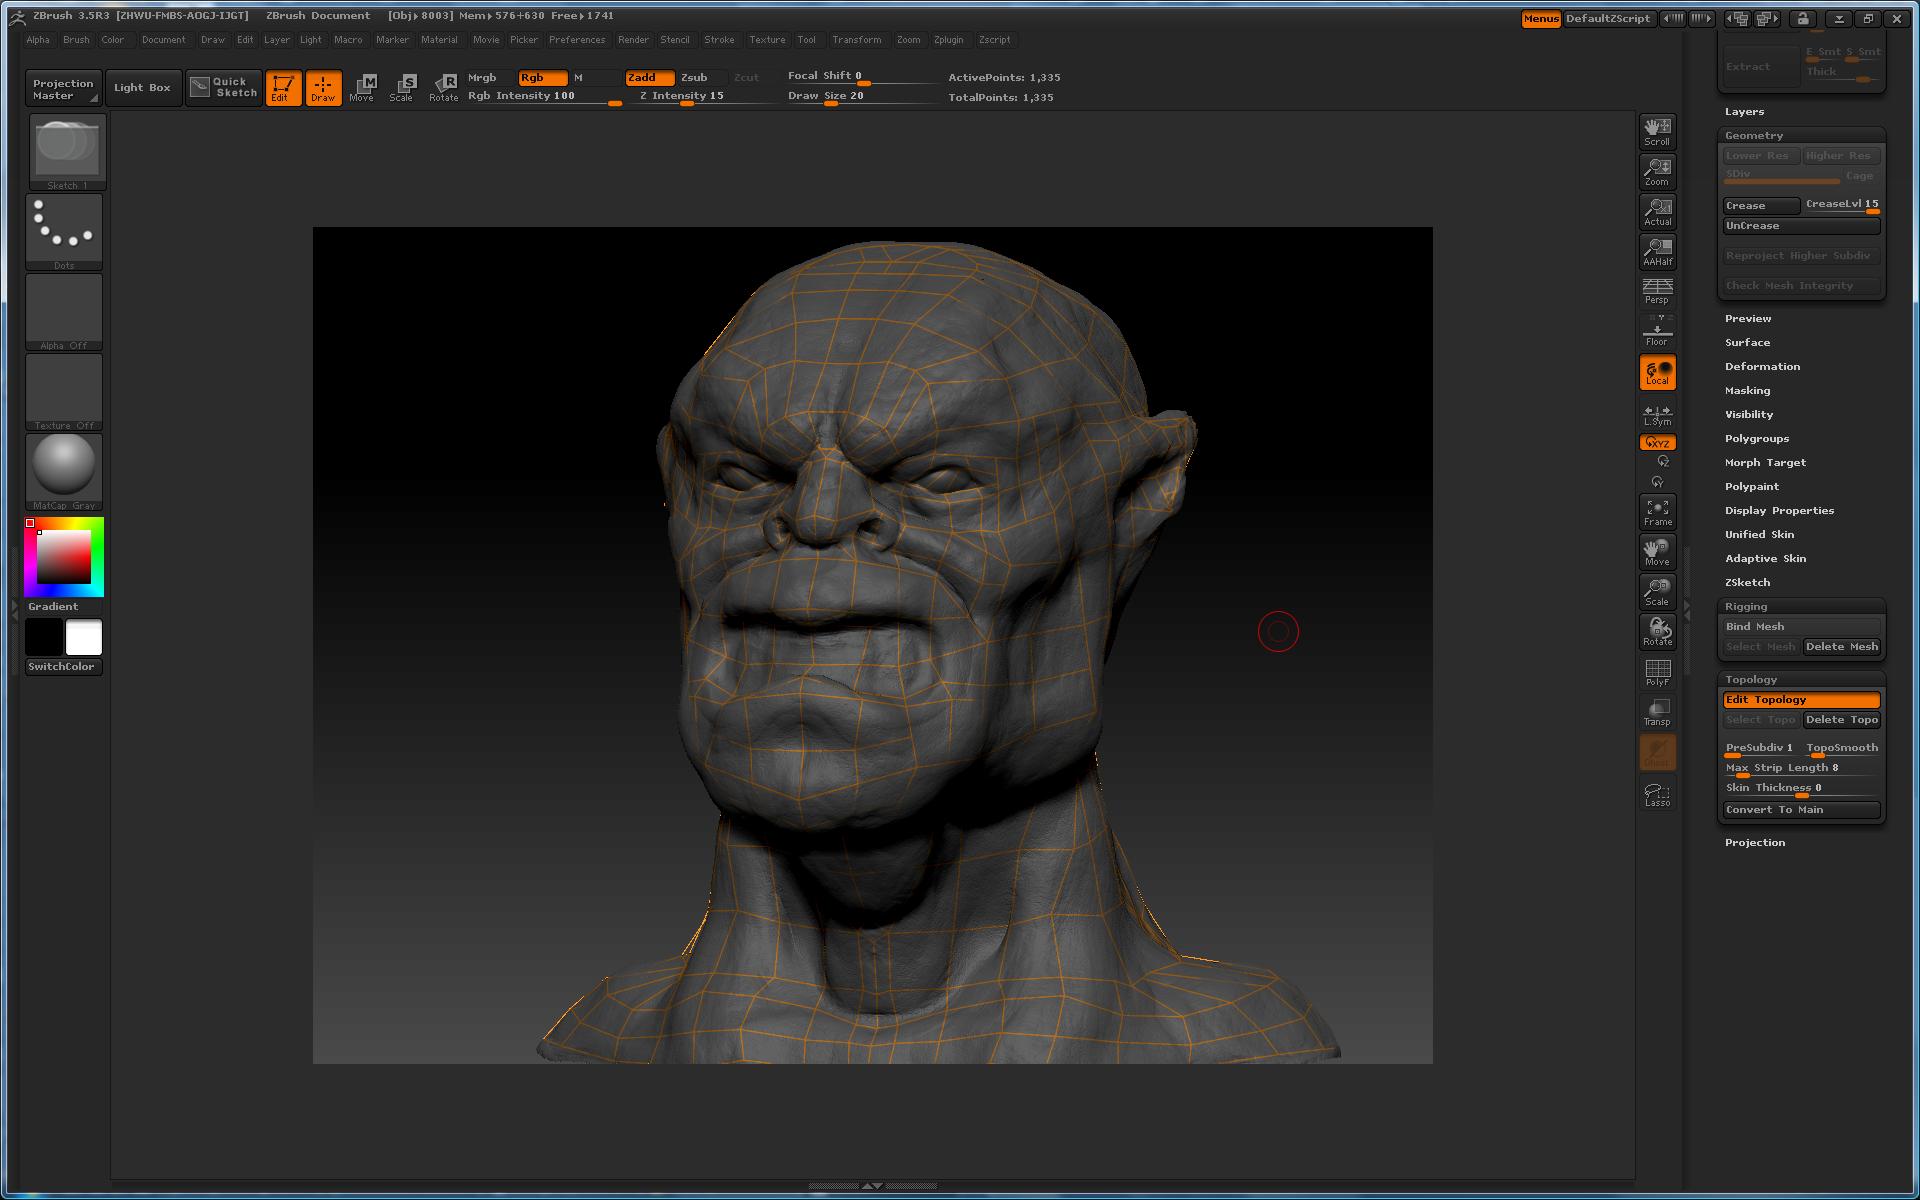 does zbrush have seassonal sale discounts